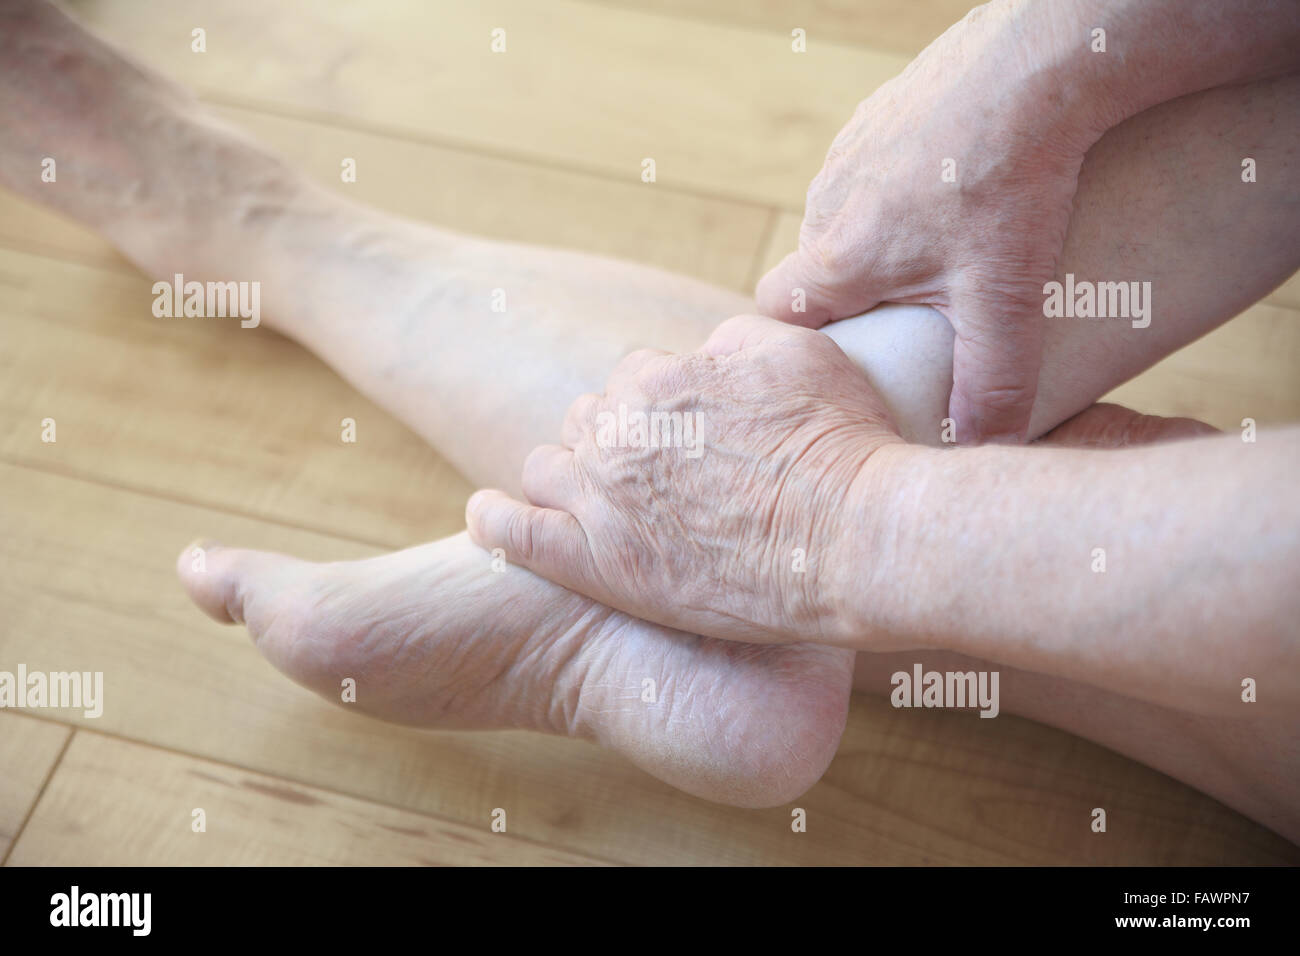 Senior man seated on floor holds an ankle with both hands. Stock Photo